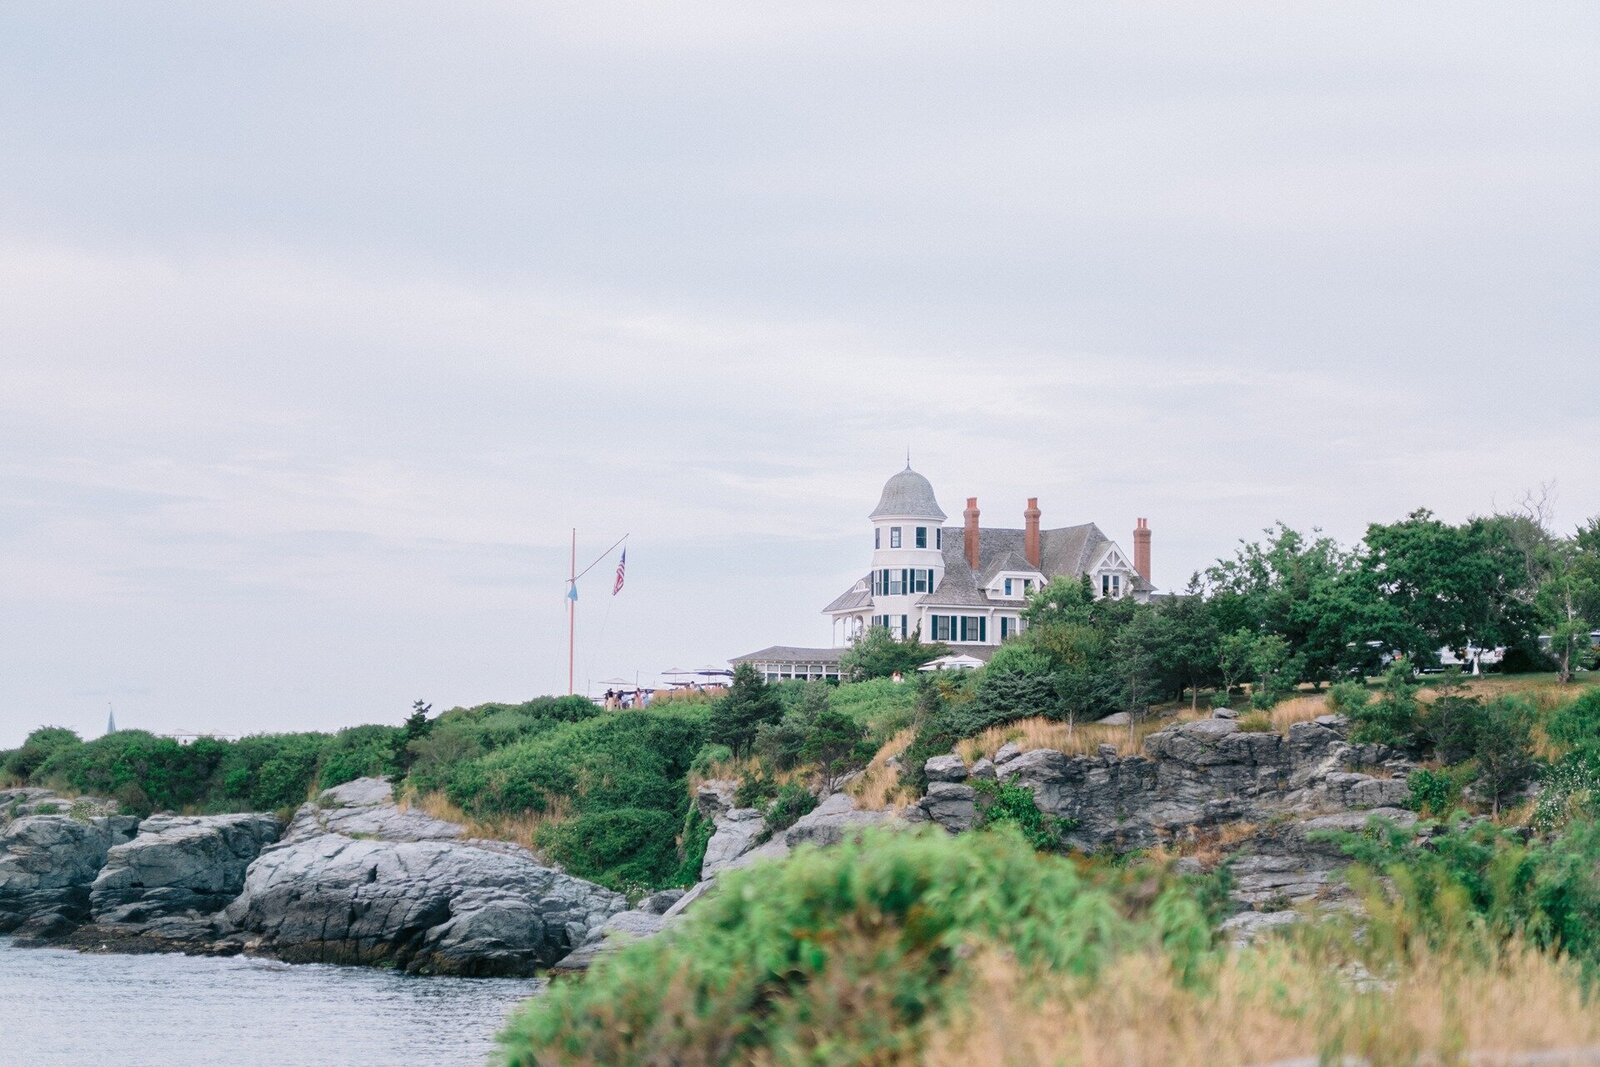 leila-james-events-newport-ri-wedding-planning-luxury-events-marisa-and-bobby-soft-and-subtle-castle-hill-inn-melissa-stimpson-photography-43